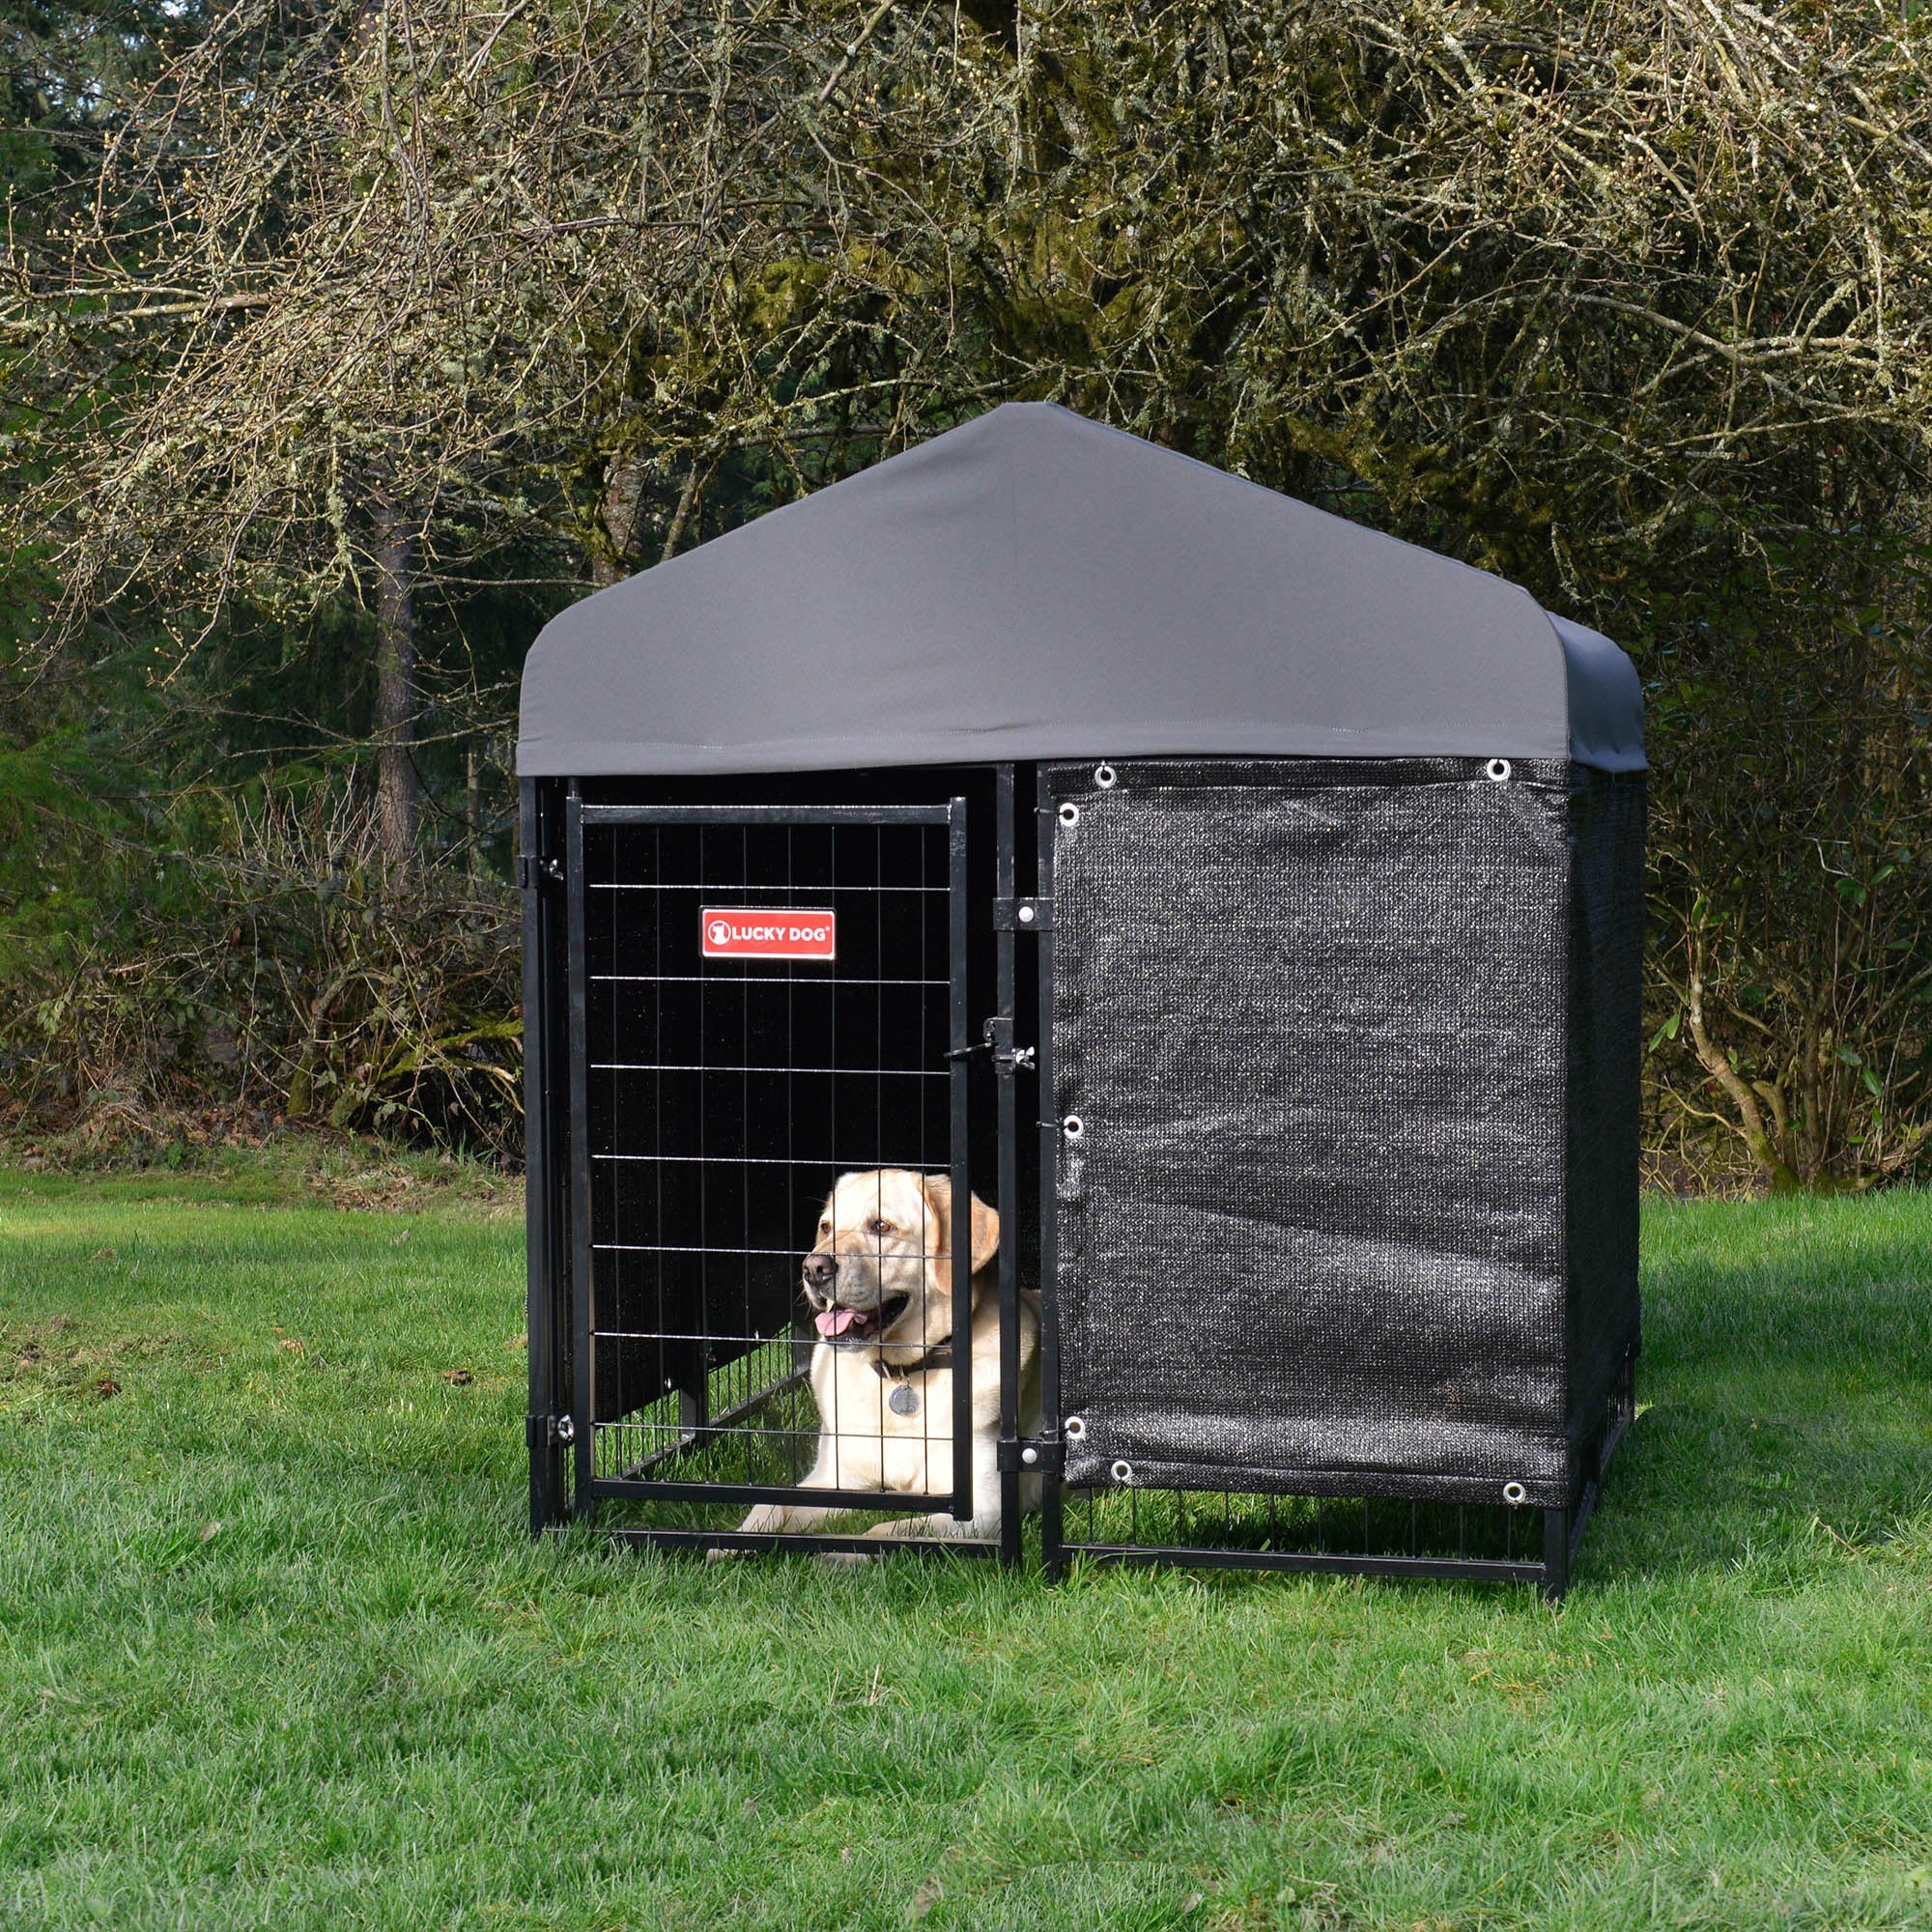 4'x4' Large Dog Kennel With Floor Mat. 